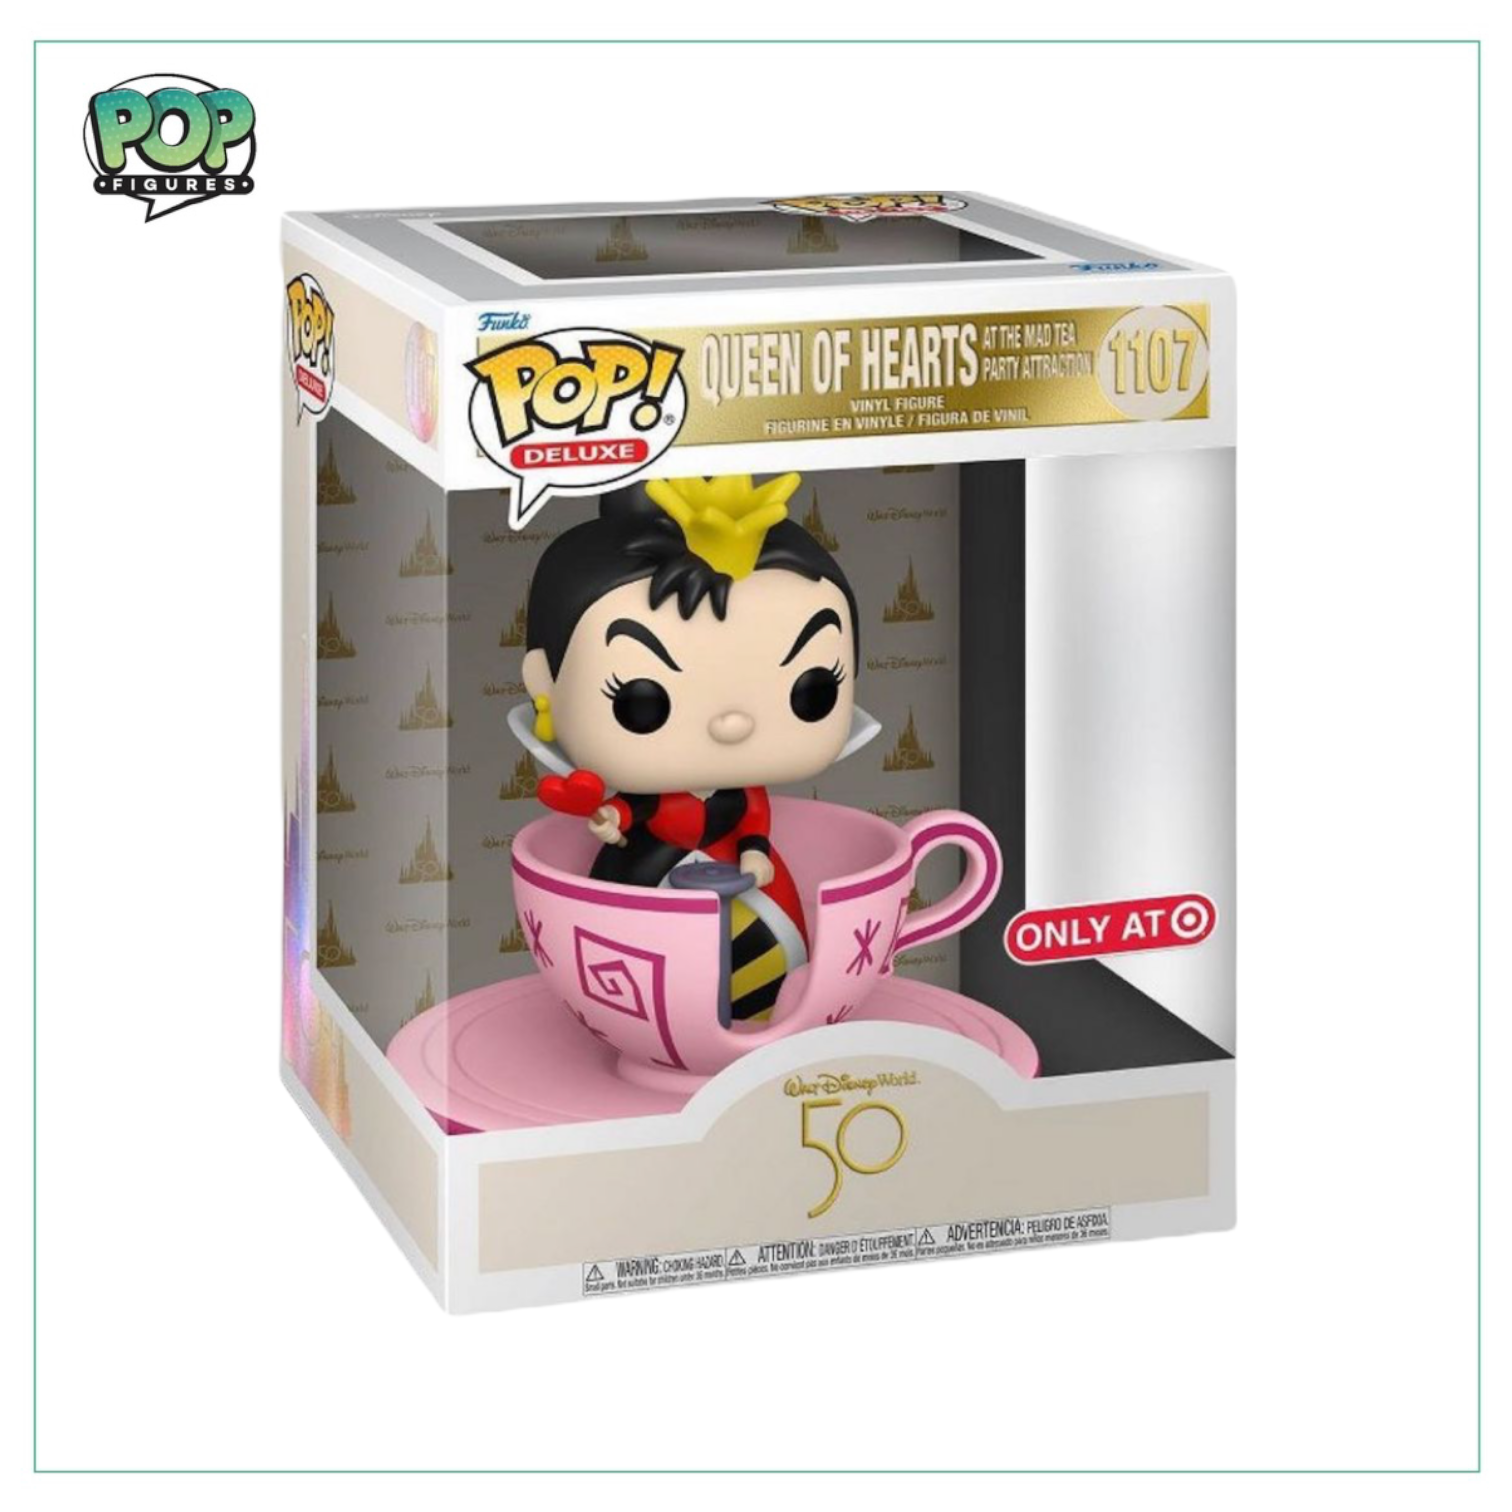 Queen of Hearts at The Mad Tea Party Attraction #1107 Deluxe Funko Pop! Alice in Wonderland - Target Exclusive - Angry Cat